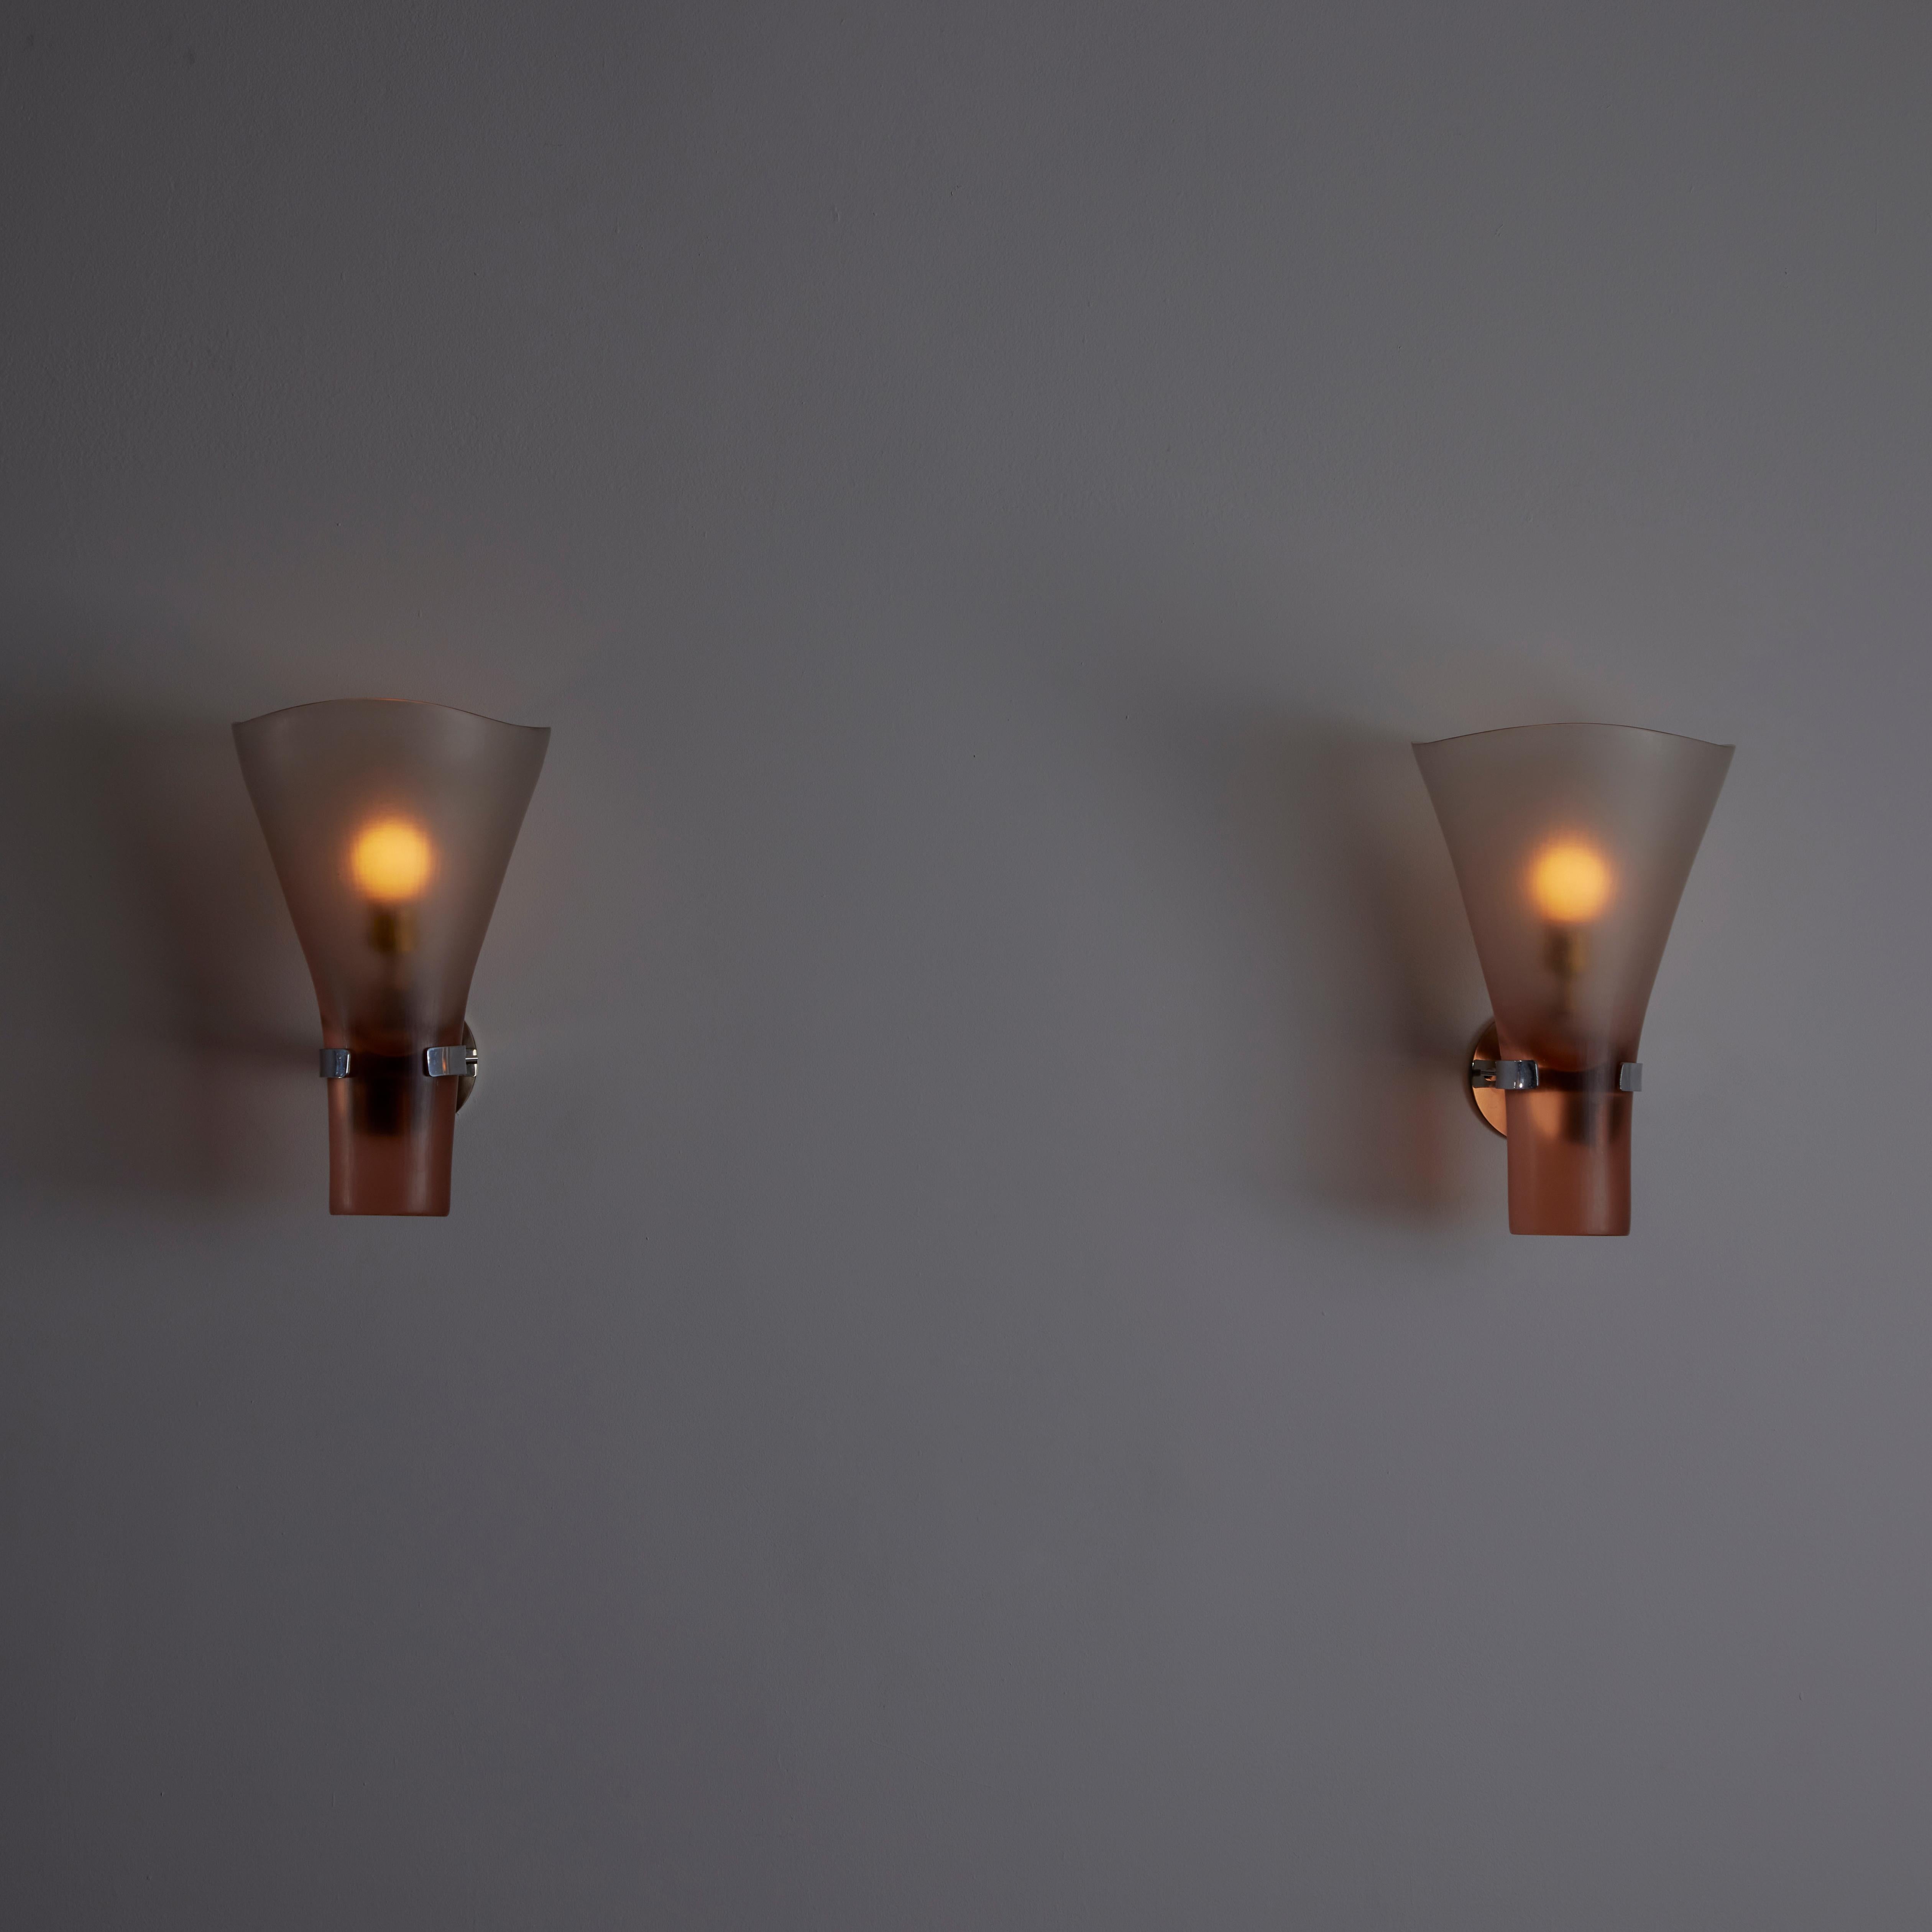 Rare Pair of Battuto Murano Sconces by Tobia Scarpa for Venini, in Italy in 1967. Chalice-shaped wall sconce in a soft pink translucent finish. We recommend a 40w maximum E12 bulb. Wired for US Standards. Bulbs are not included.

Literature: Franco